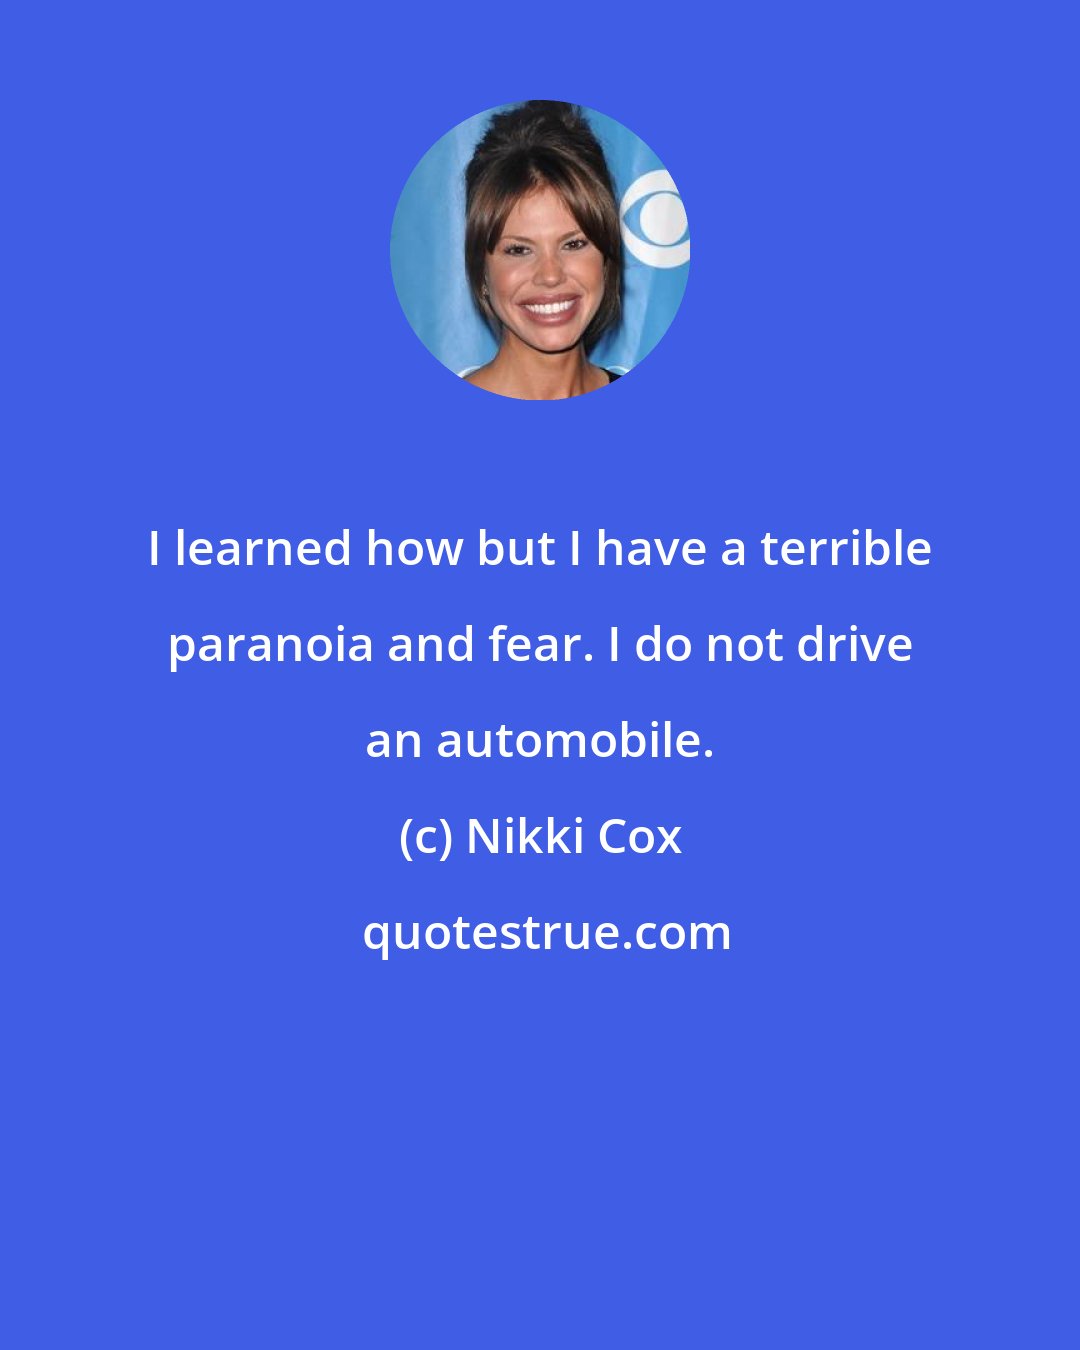 Nikki Cox: I learned how but I have a terrible paranoia and fear. I do not drive an automobile.